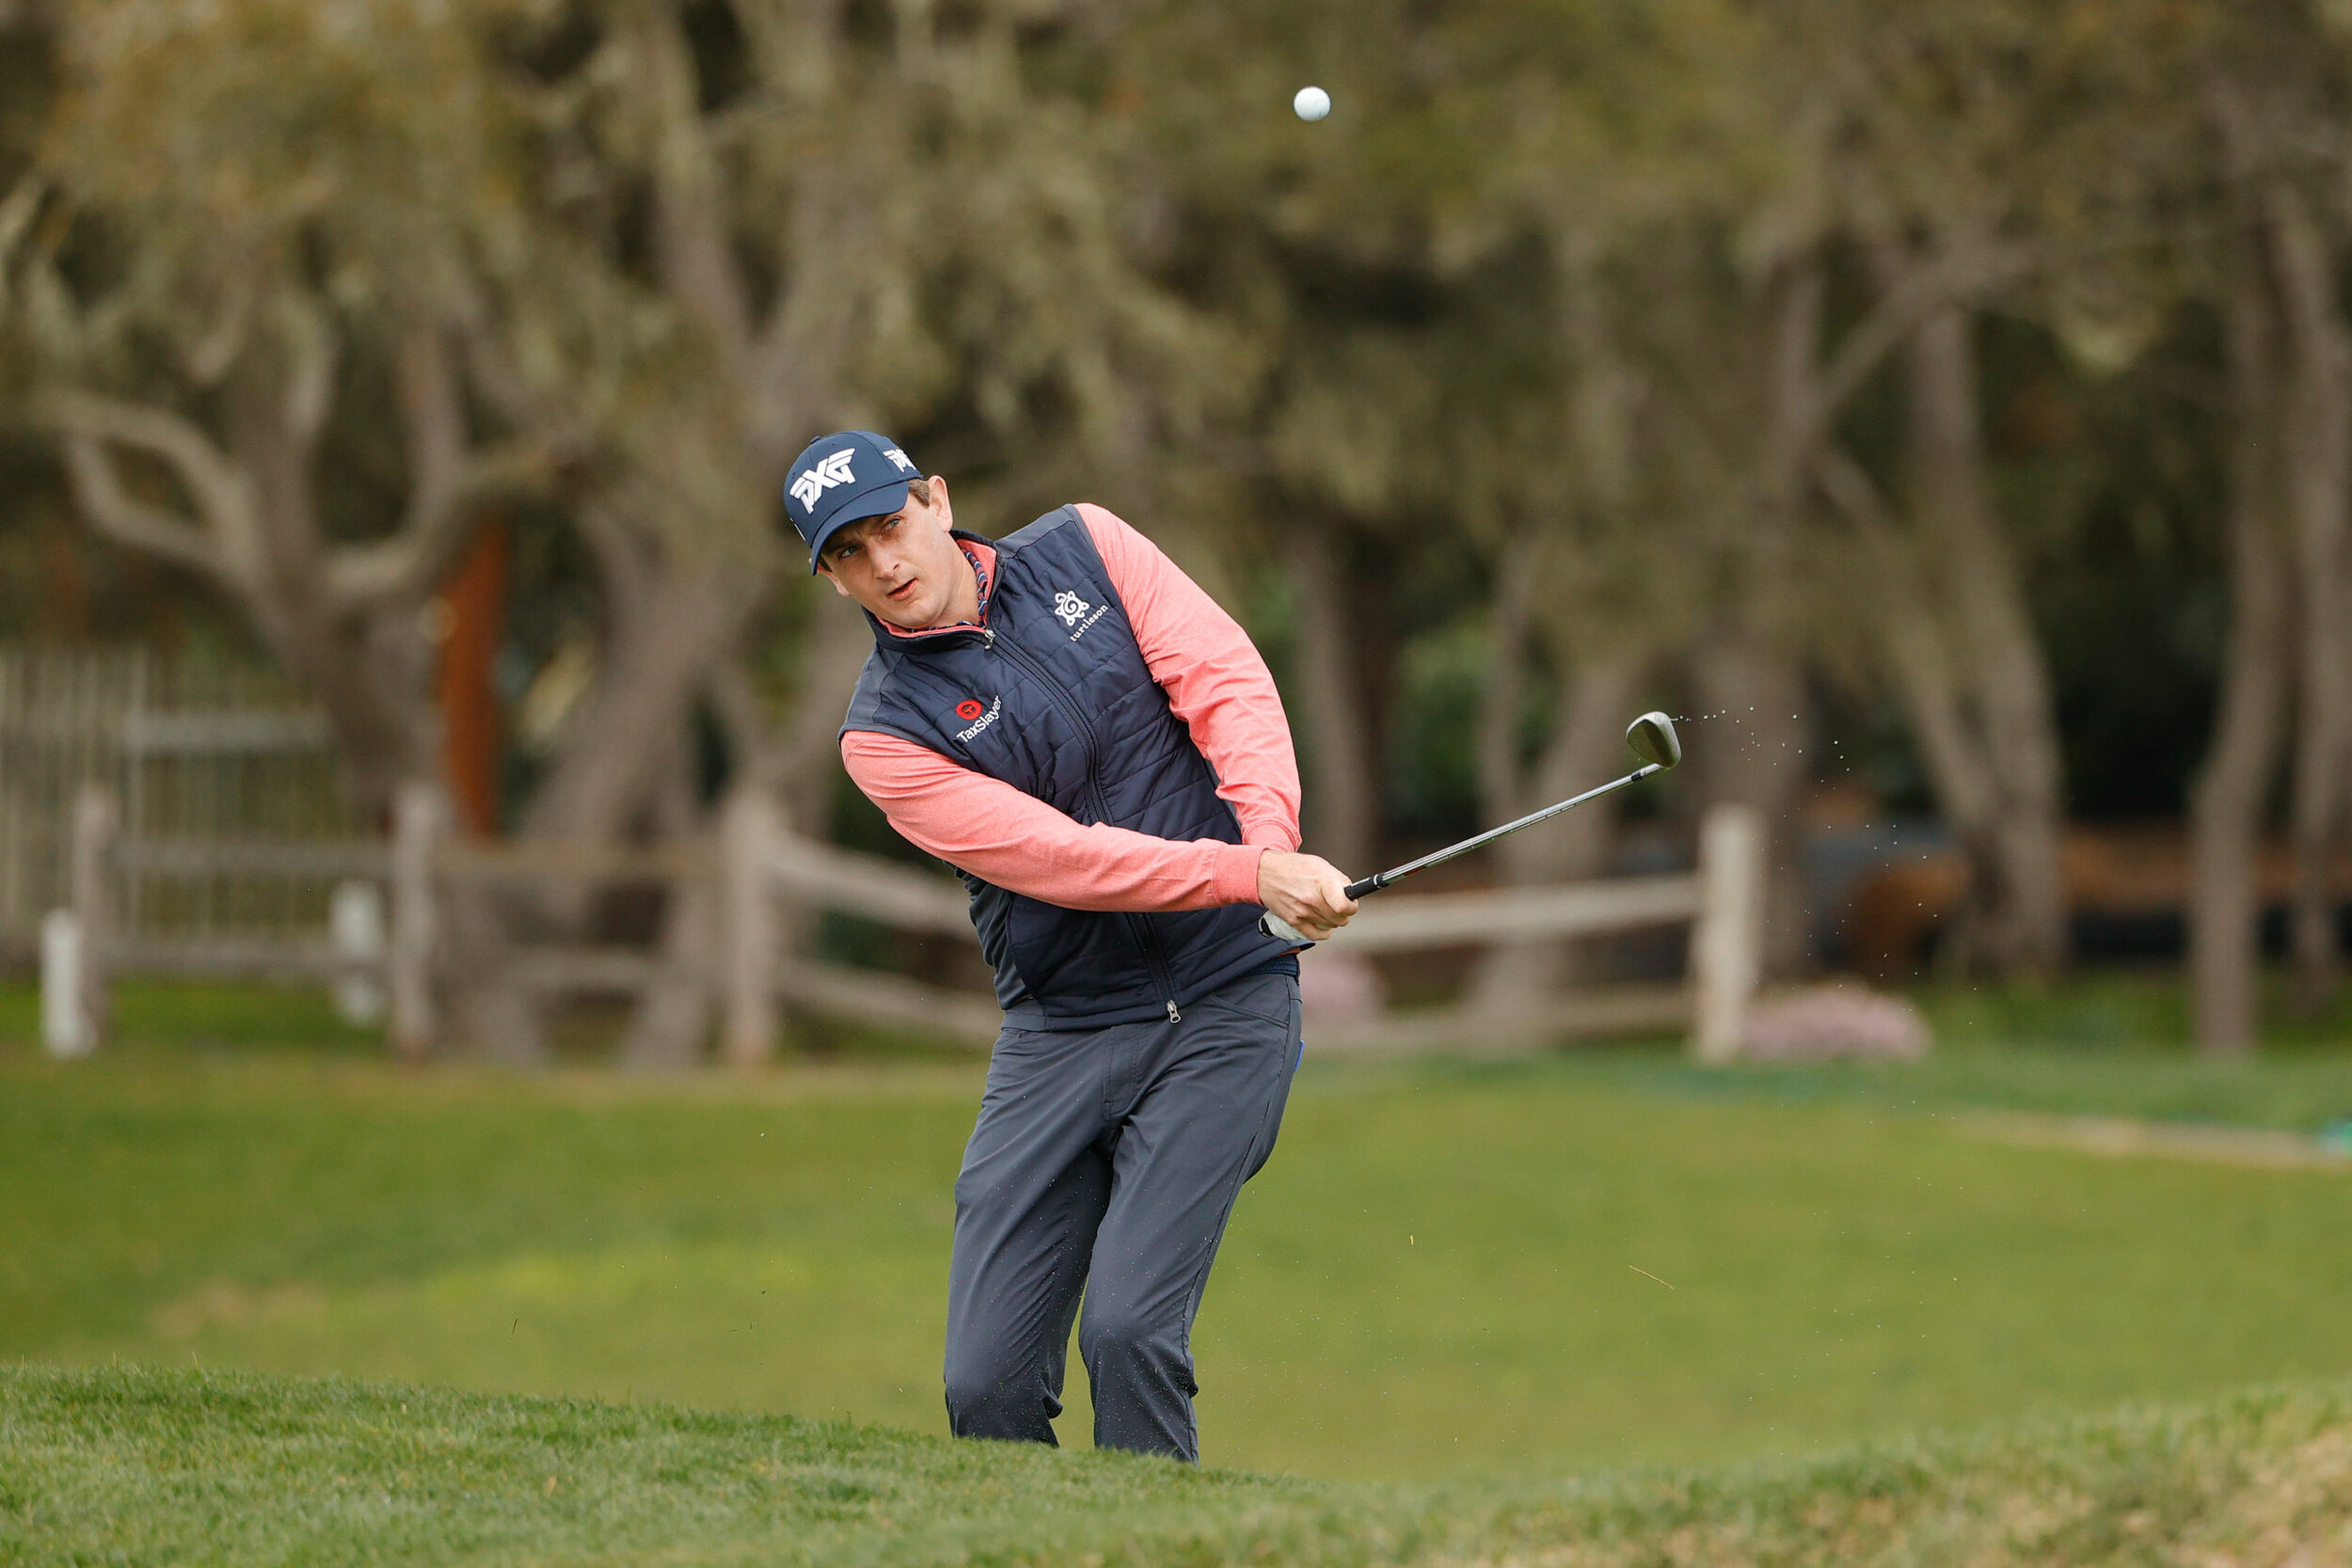  PEBBLE BEACH, CALIFORNIA - FEBRUARY 11: Henrik Norlander of Sweden plays a shot on the second hole during the first round of the AT&T Pebble Beach Pro-Am at Pebble Beach Golf Links on February 11, 2021 in Pebble Beach, California. (Photo by Ezra Sha